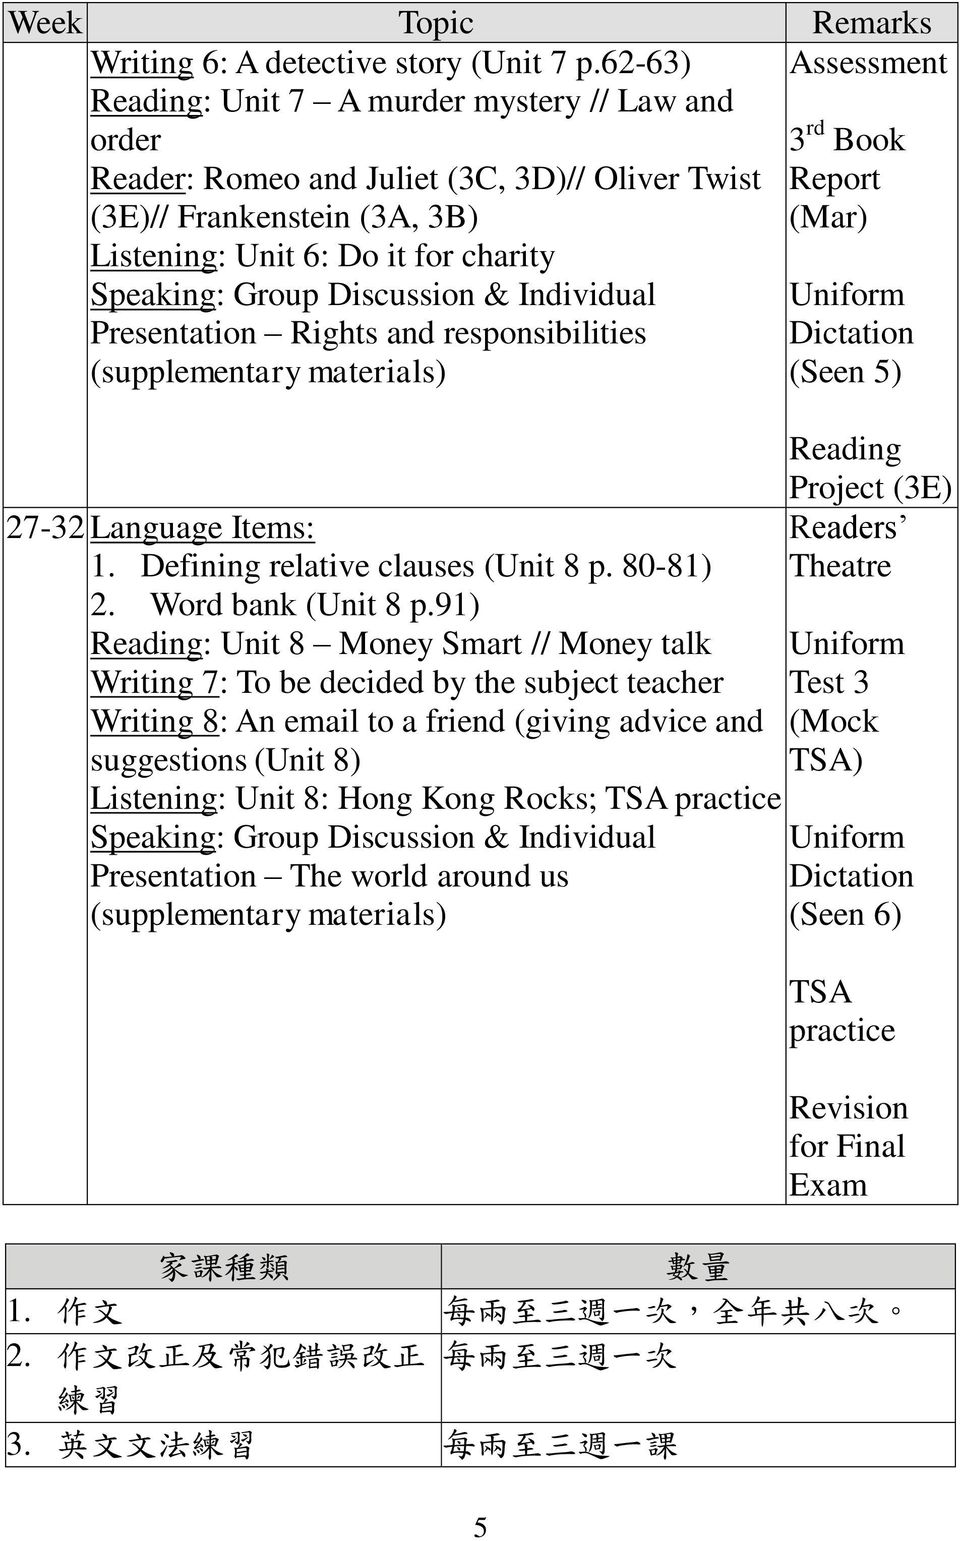 Discussion & Individual Presentation Rights and responsibilities (supplementary materials) (Seen 5) 27-32 Language Items: 1. Defining relative clauses (Unit 8 p. 80-81) 2. Word bank (Unit 8 p.